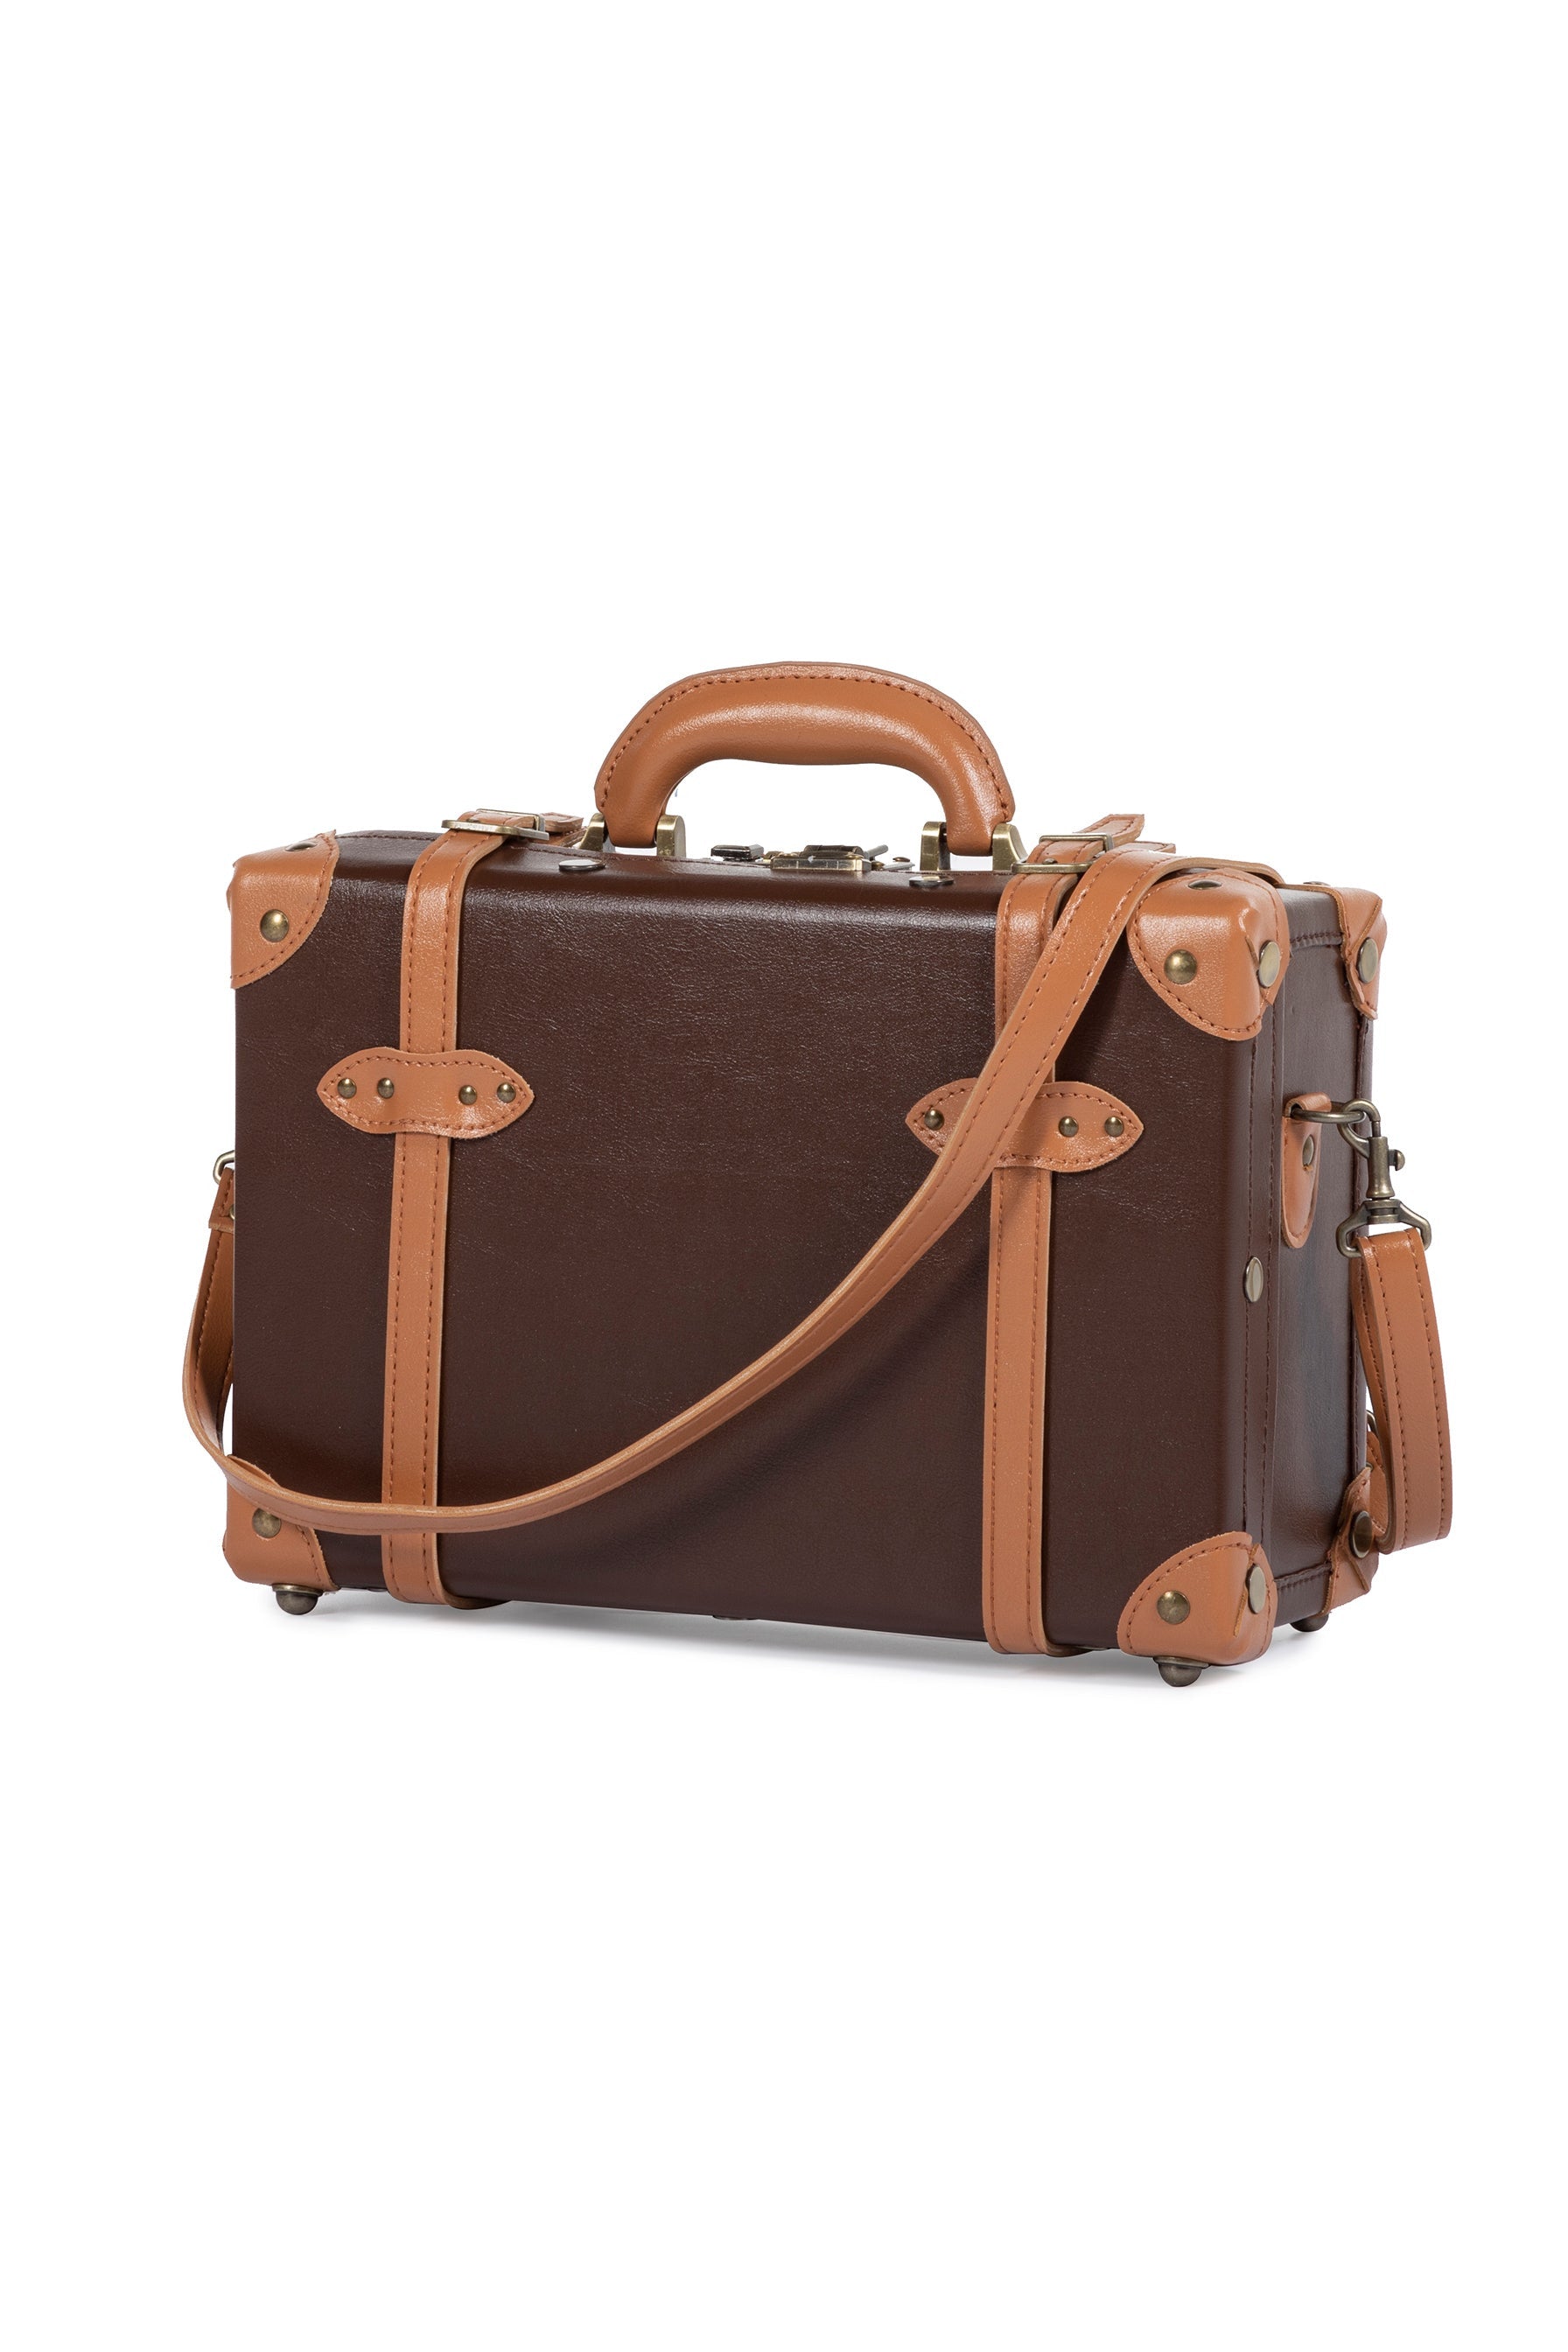 Minimalism 2 Pieces Luggage Set - Cocoa Brown's